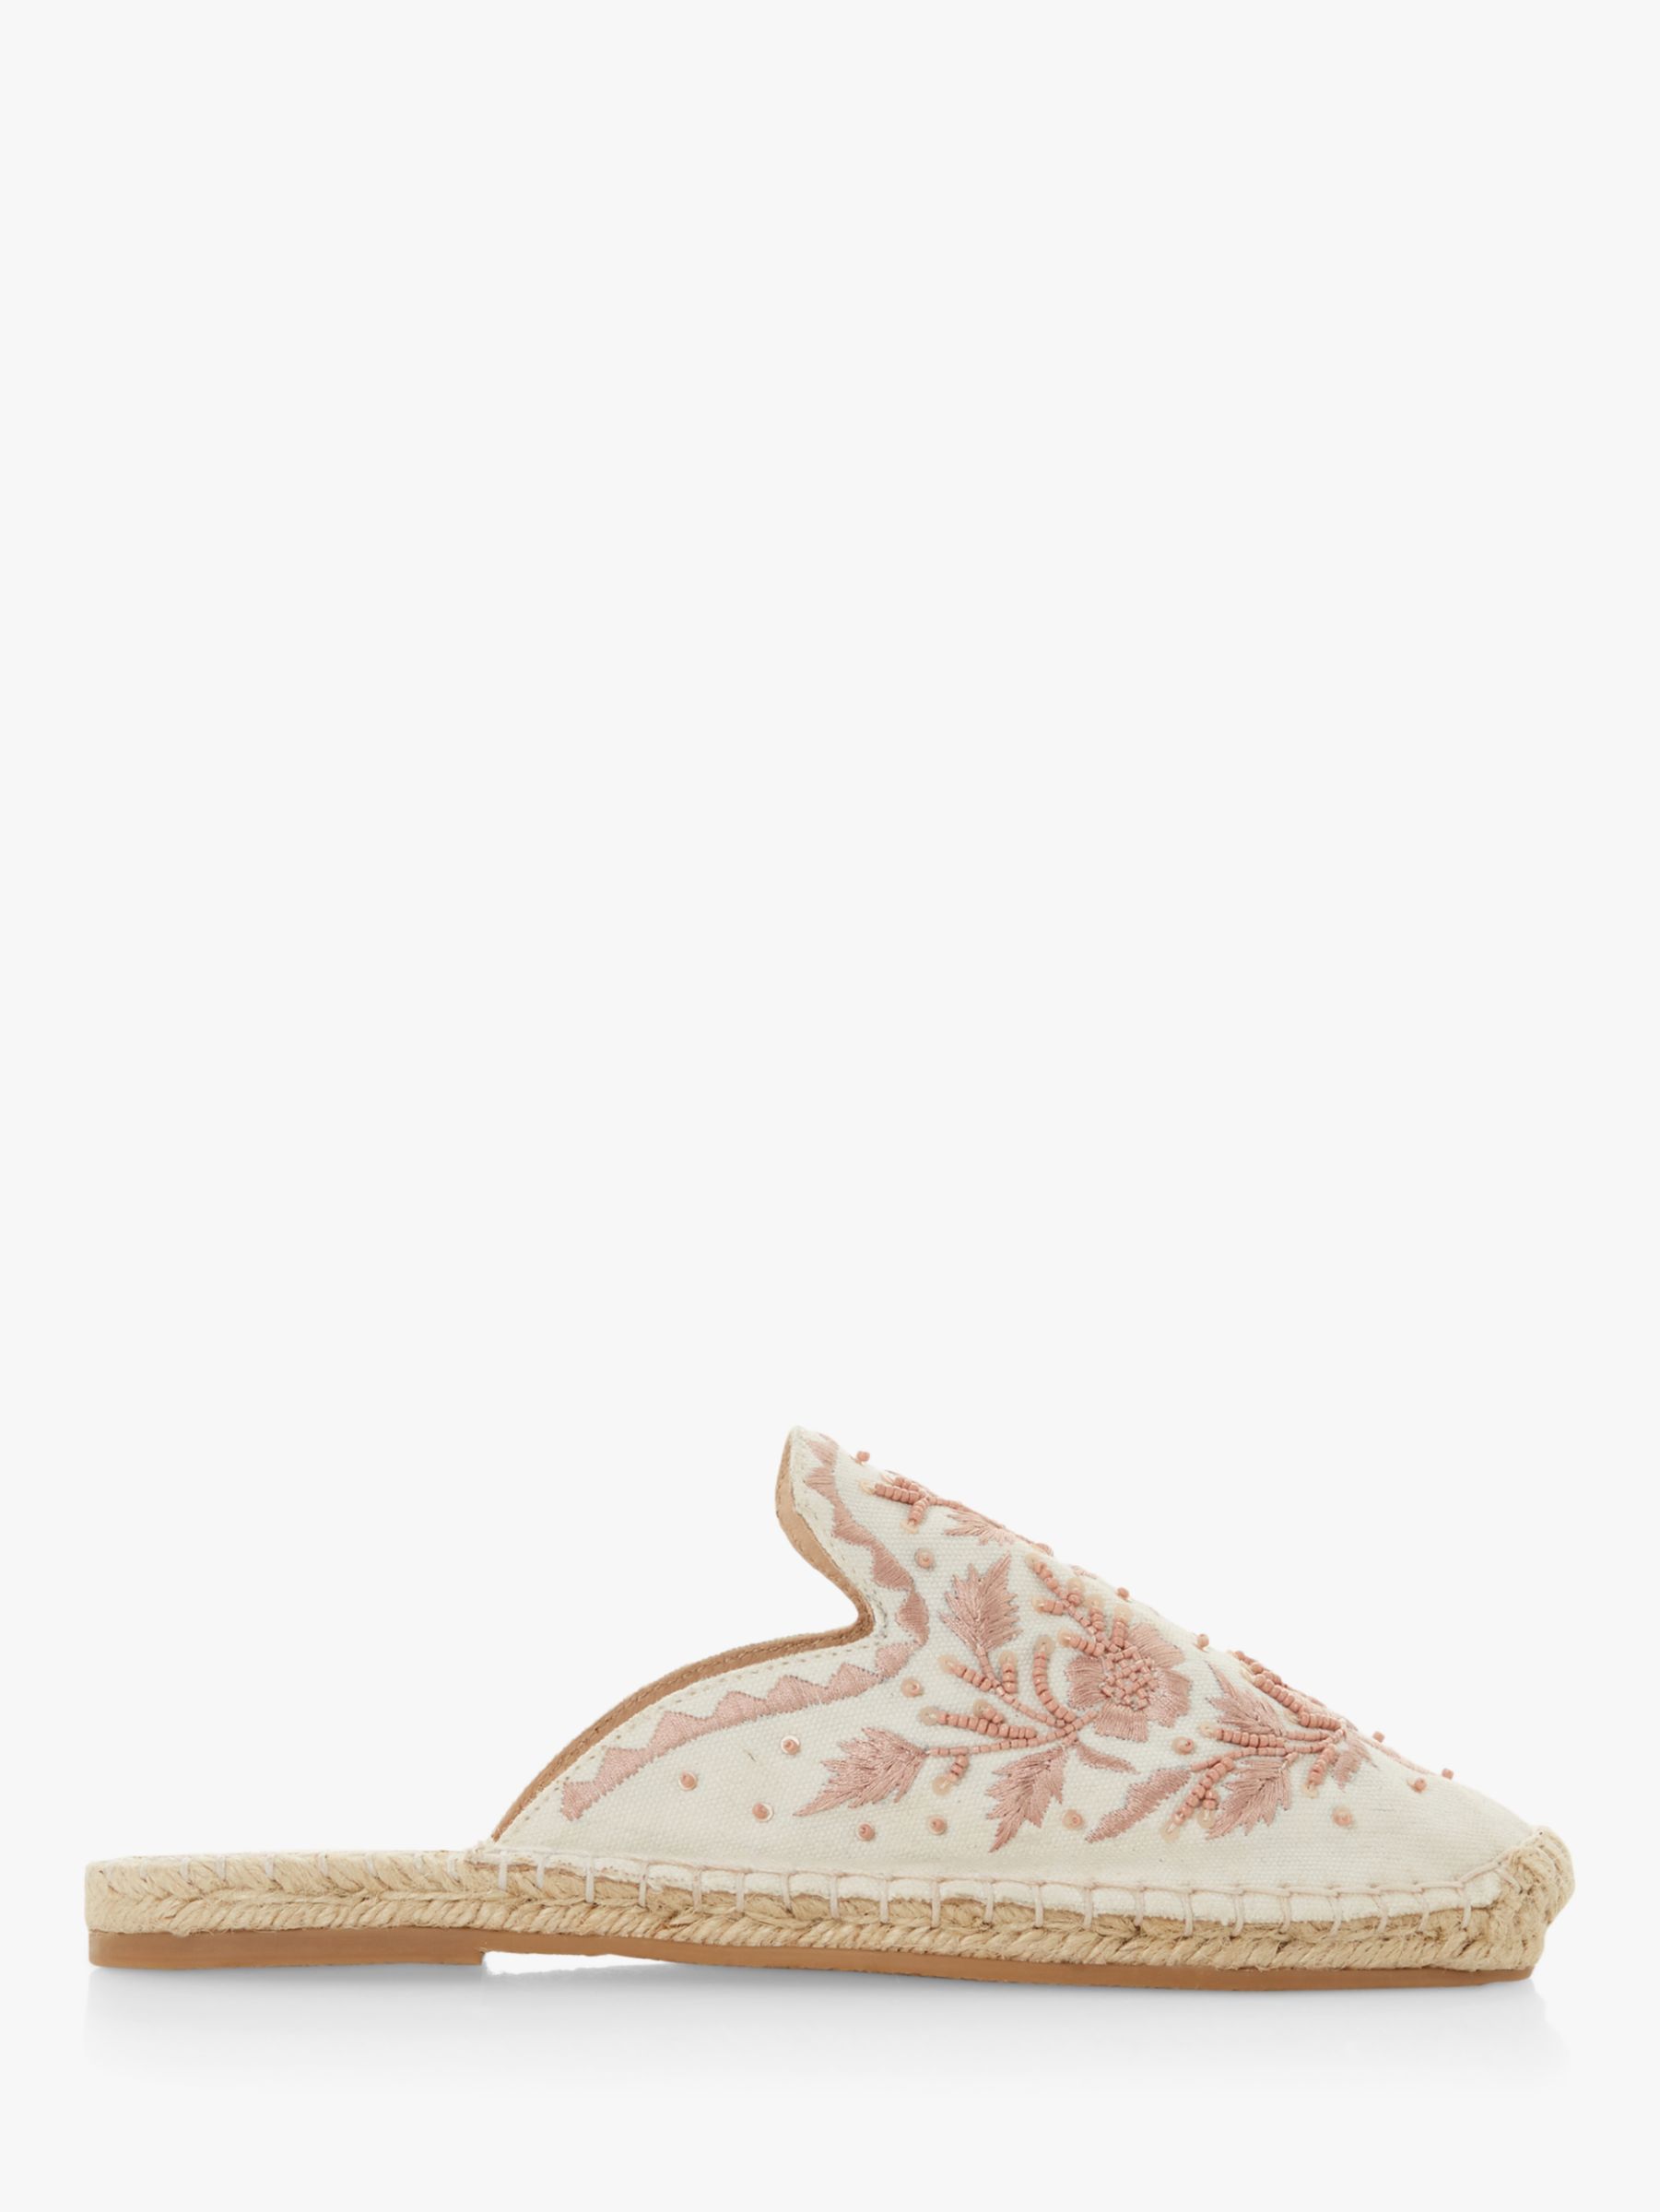 Bertie Goste Canvas Embellished Mules